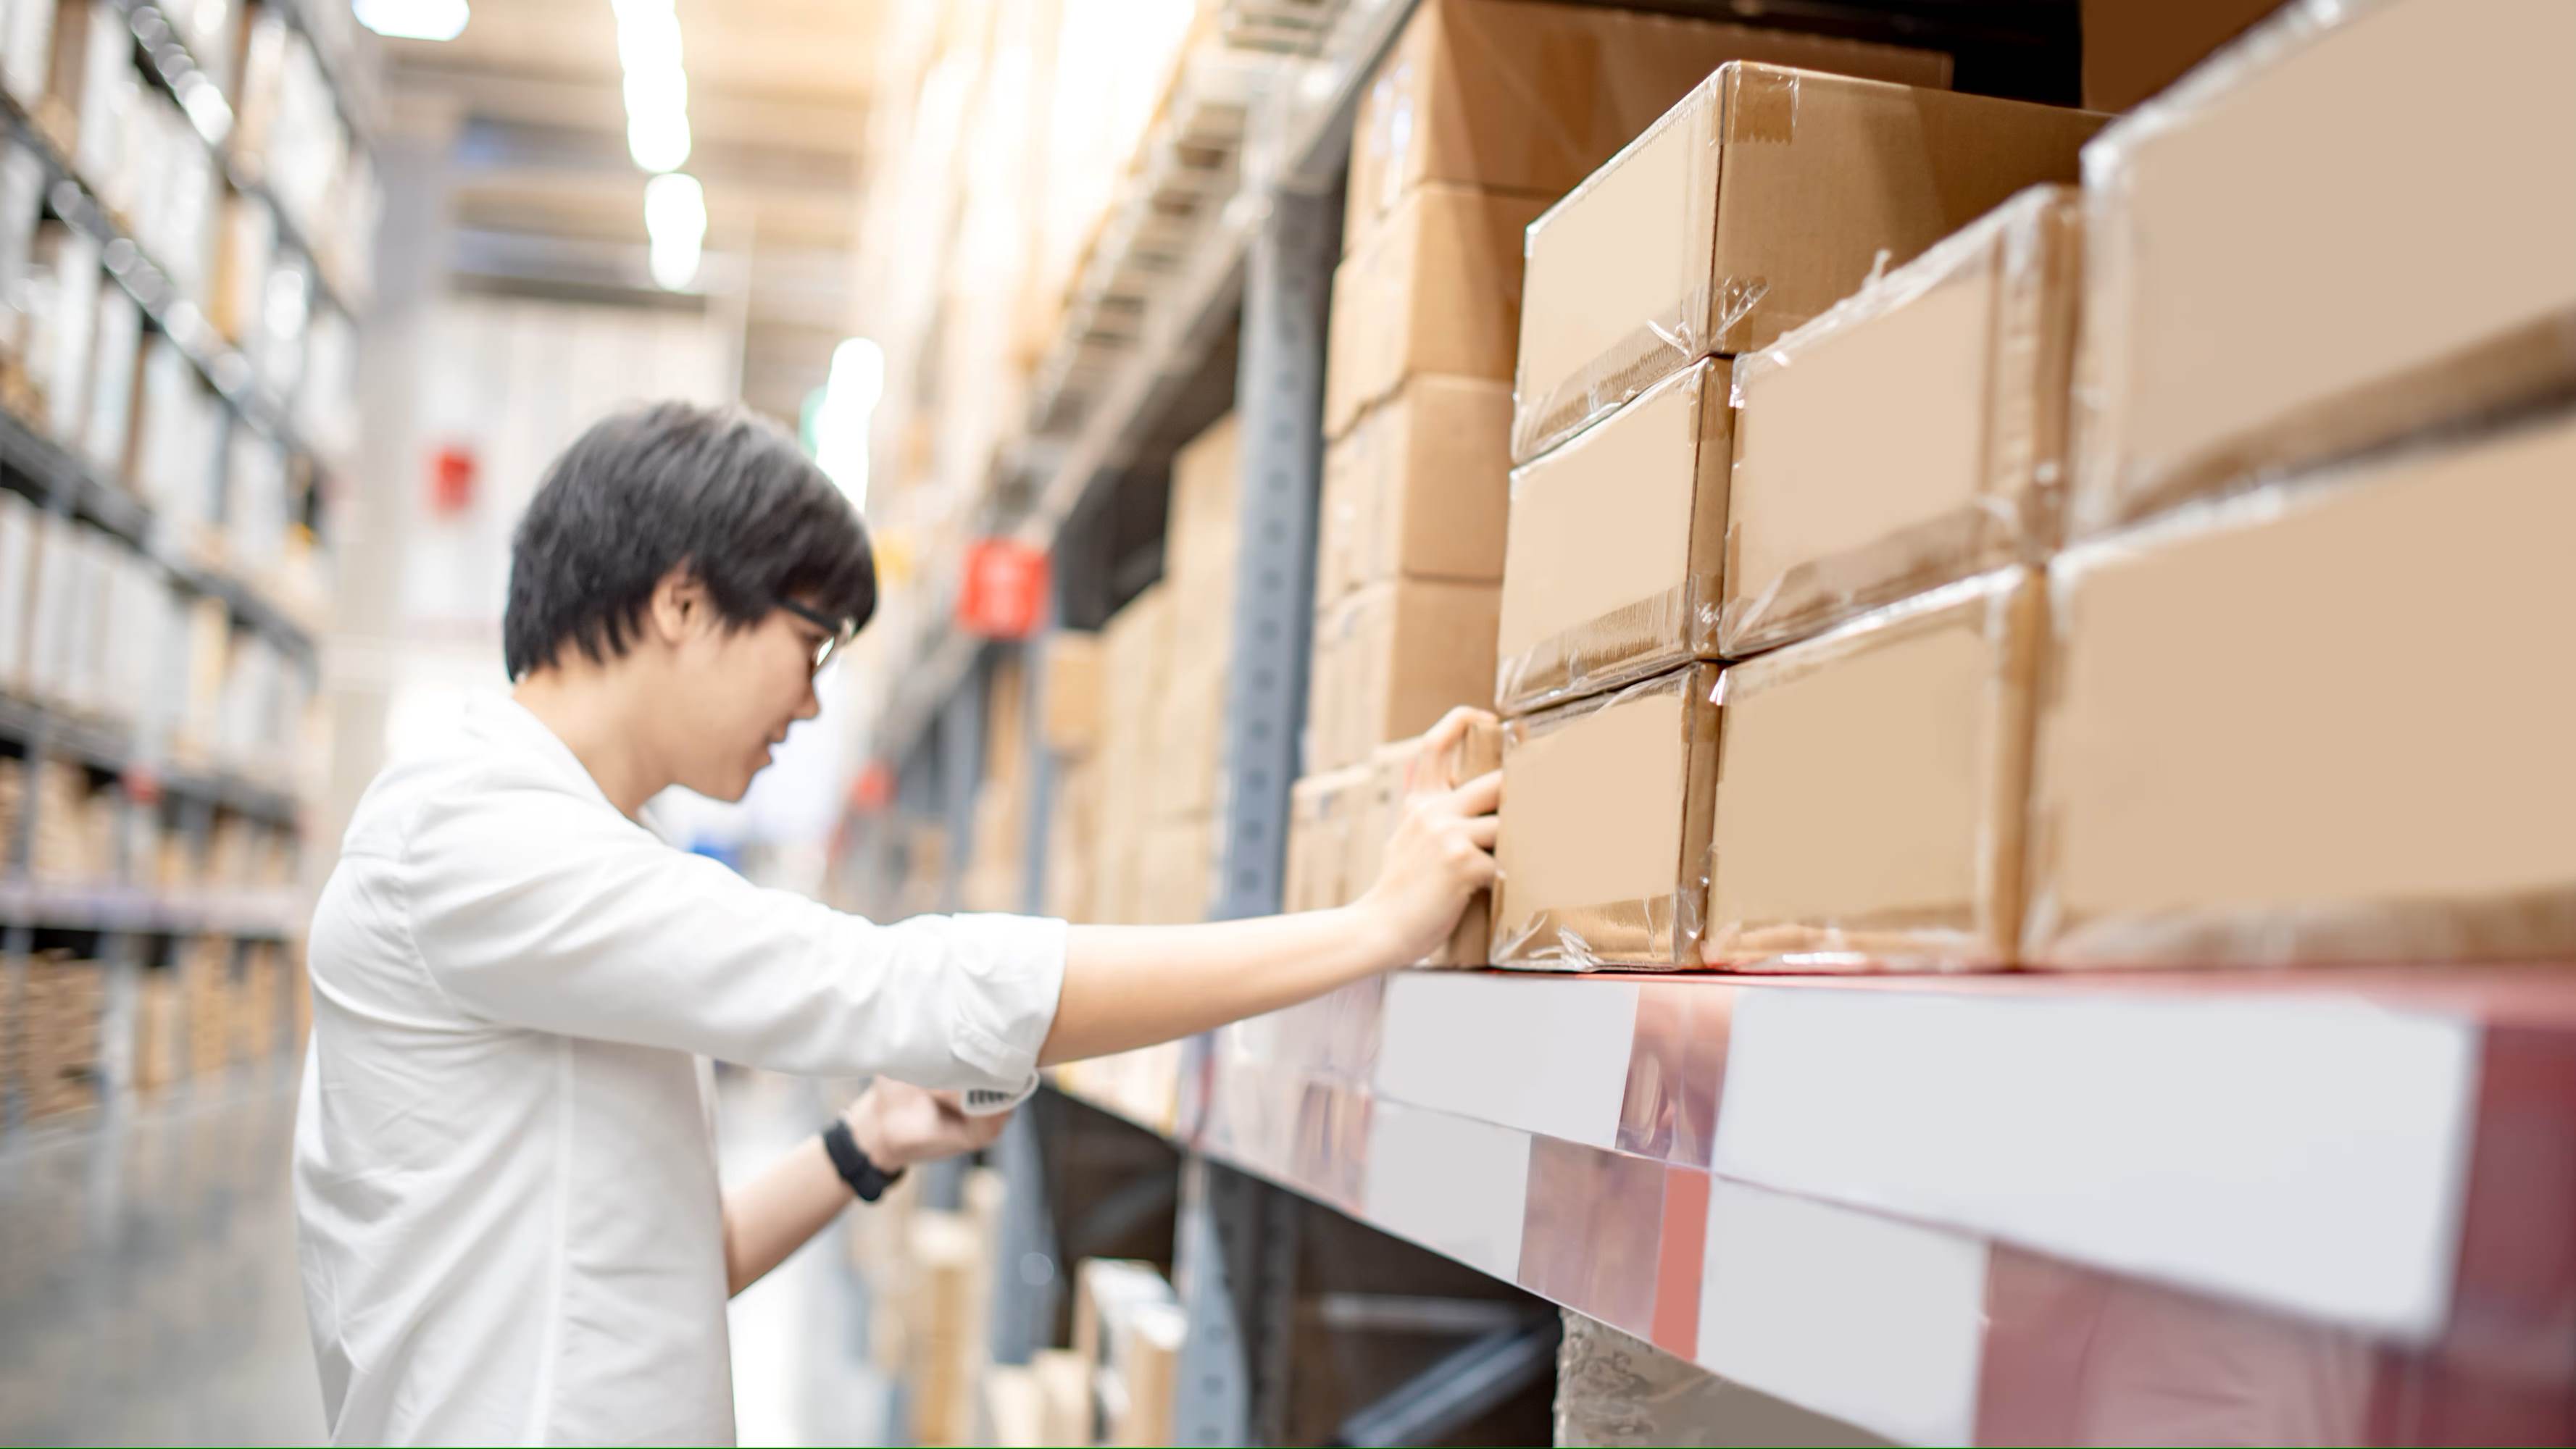 How To Add Inventory In Quickbooks